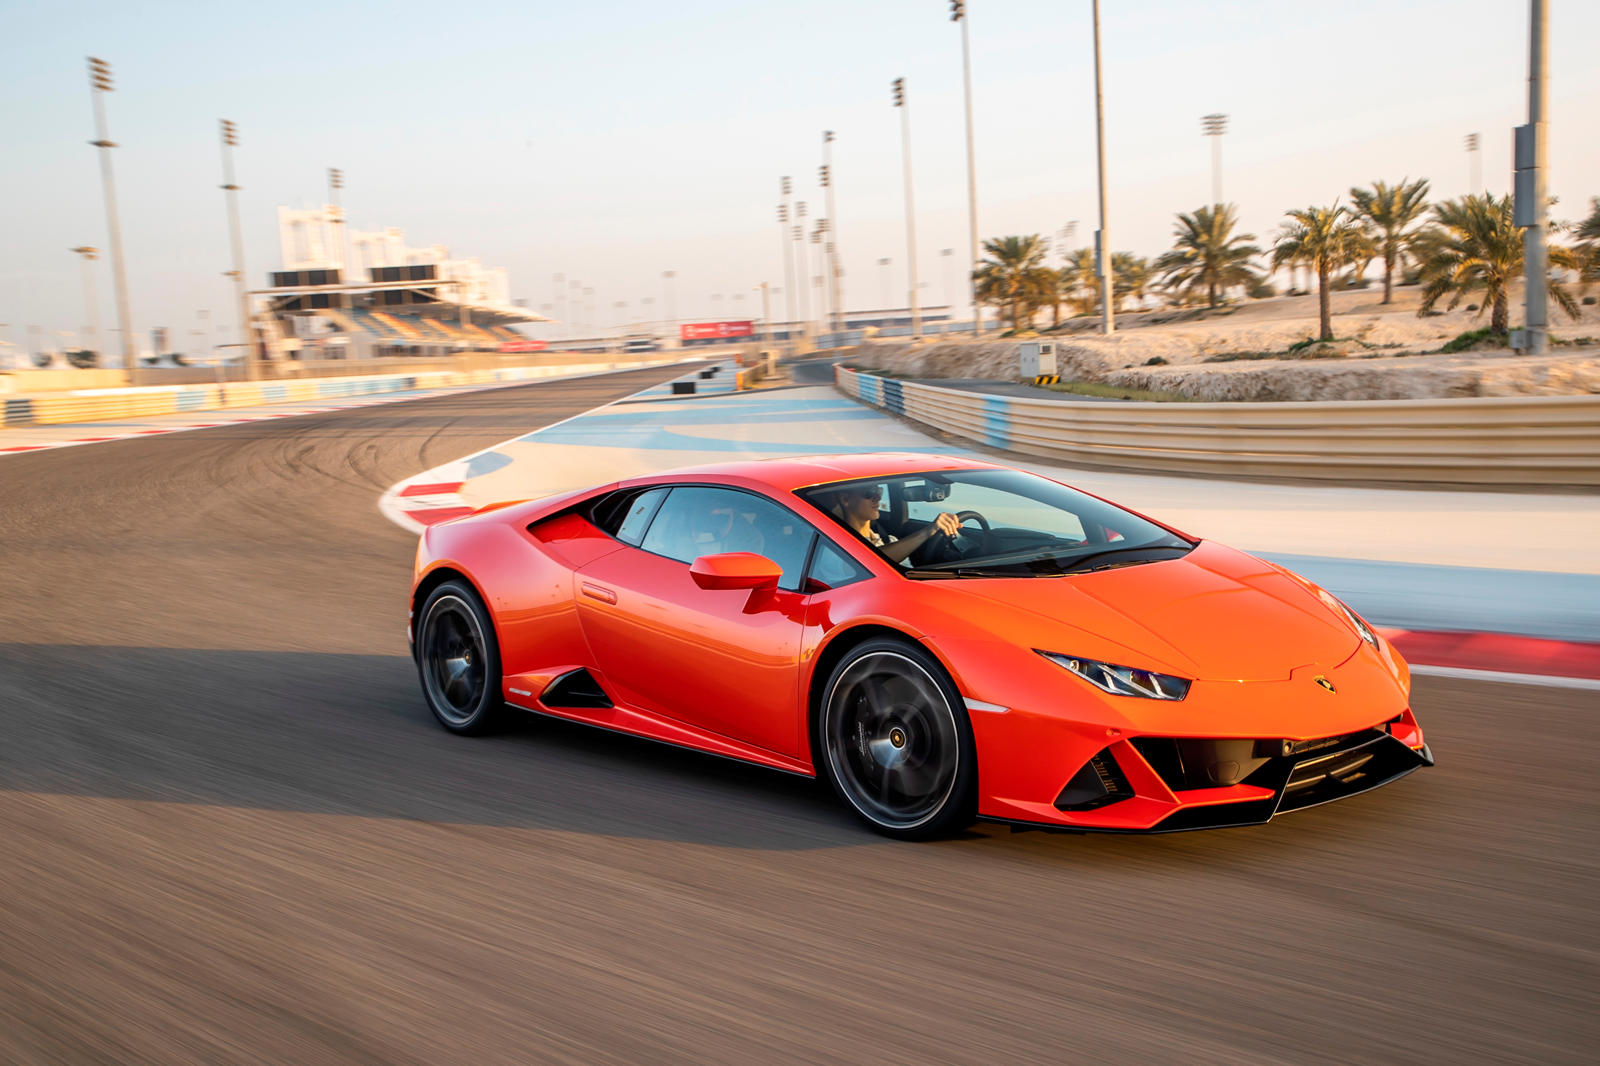 Huracán EVO Fluo Capsule: light up your road